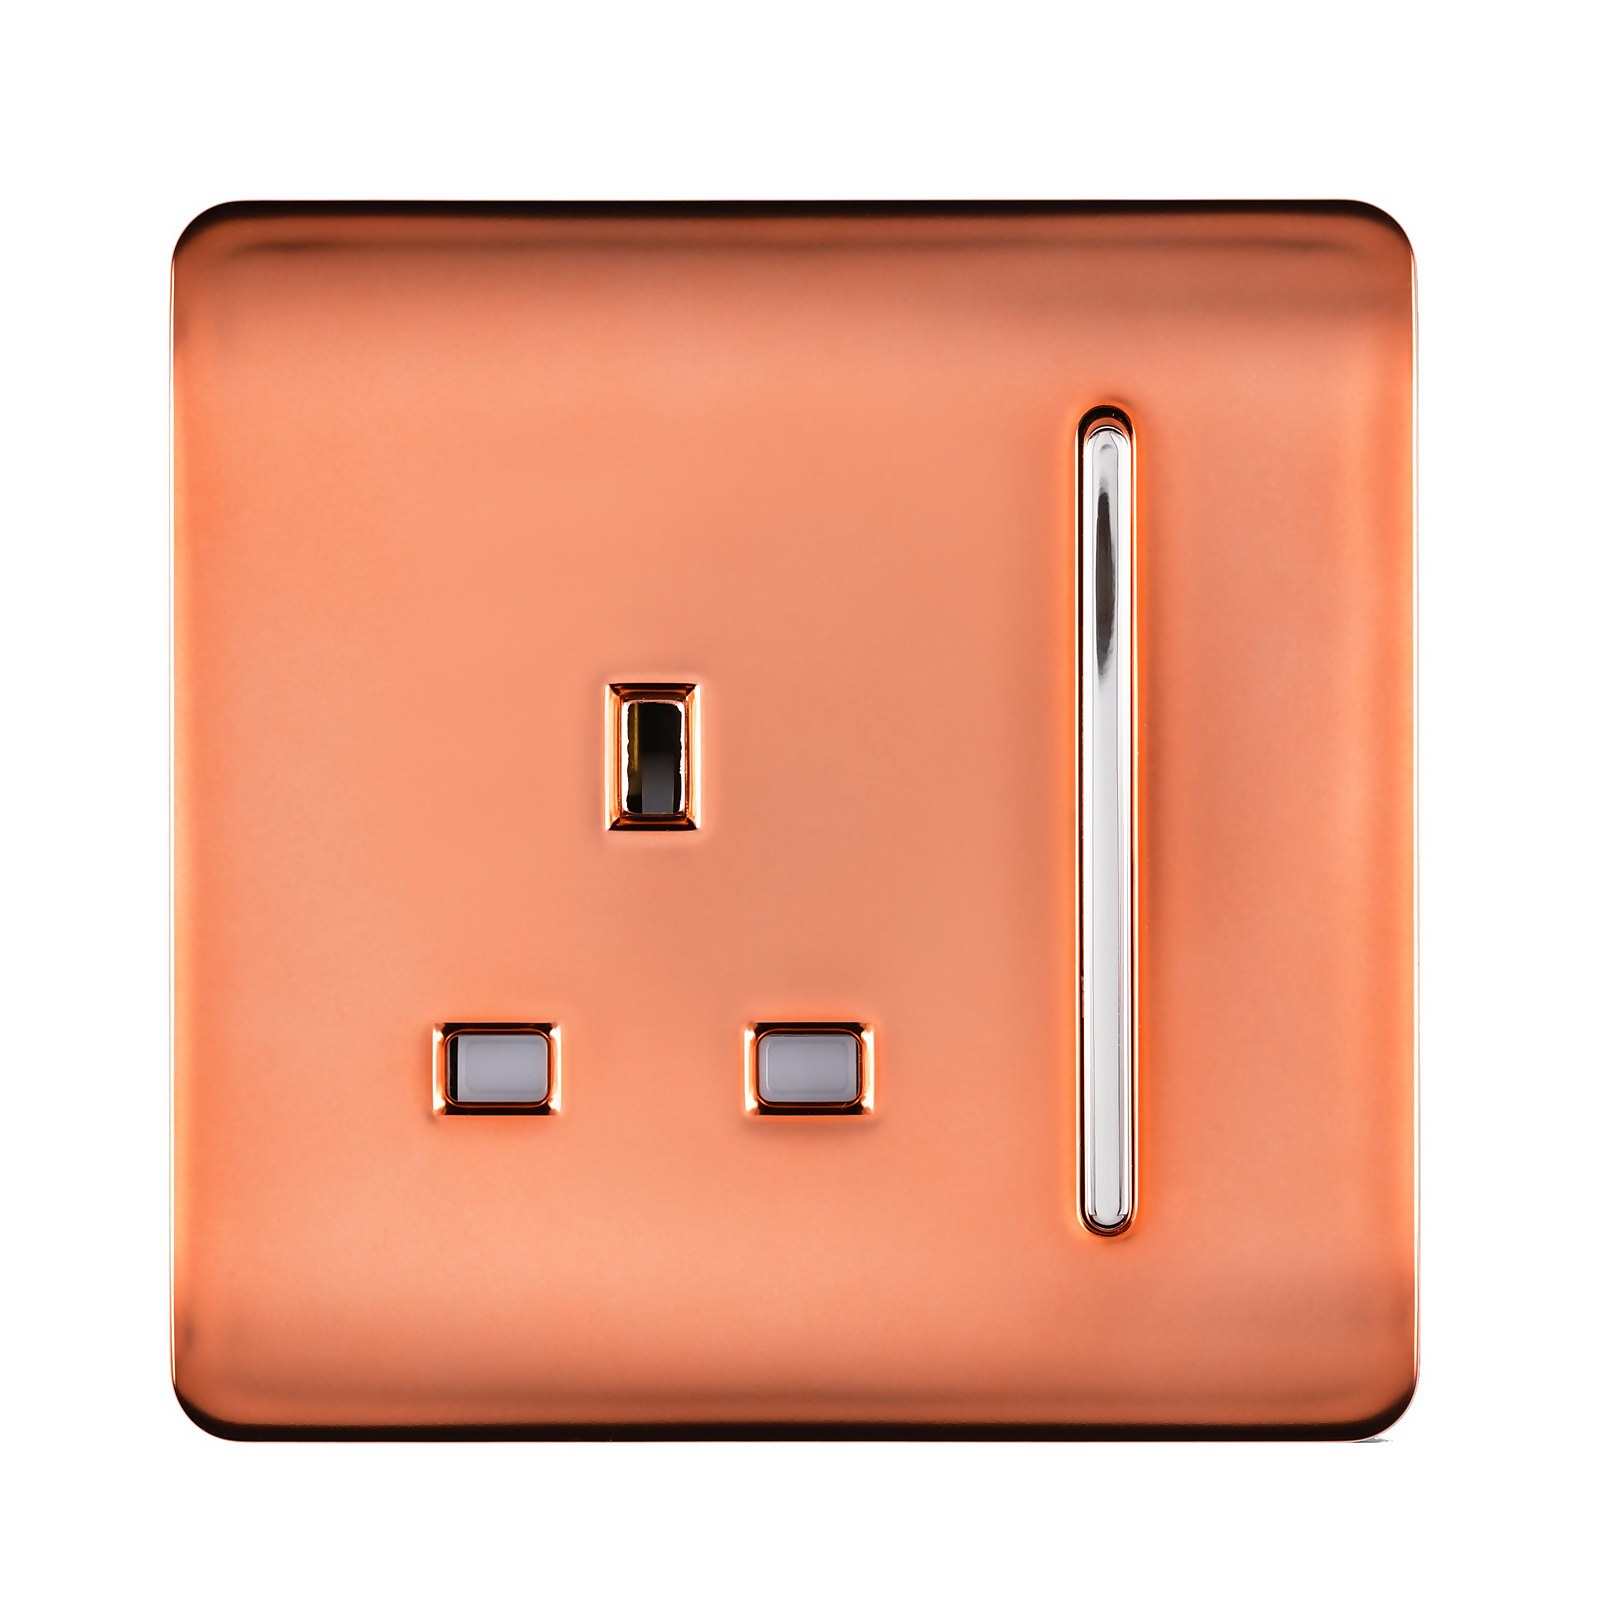 Photo of Trendi Switch Single Switched Socket - Copper